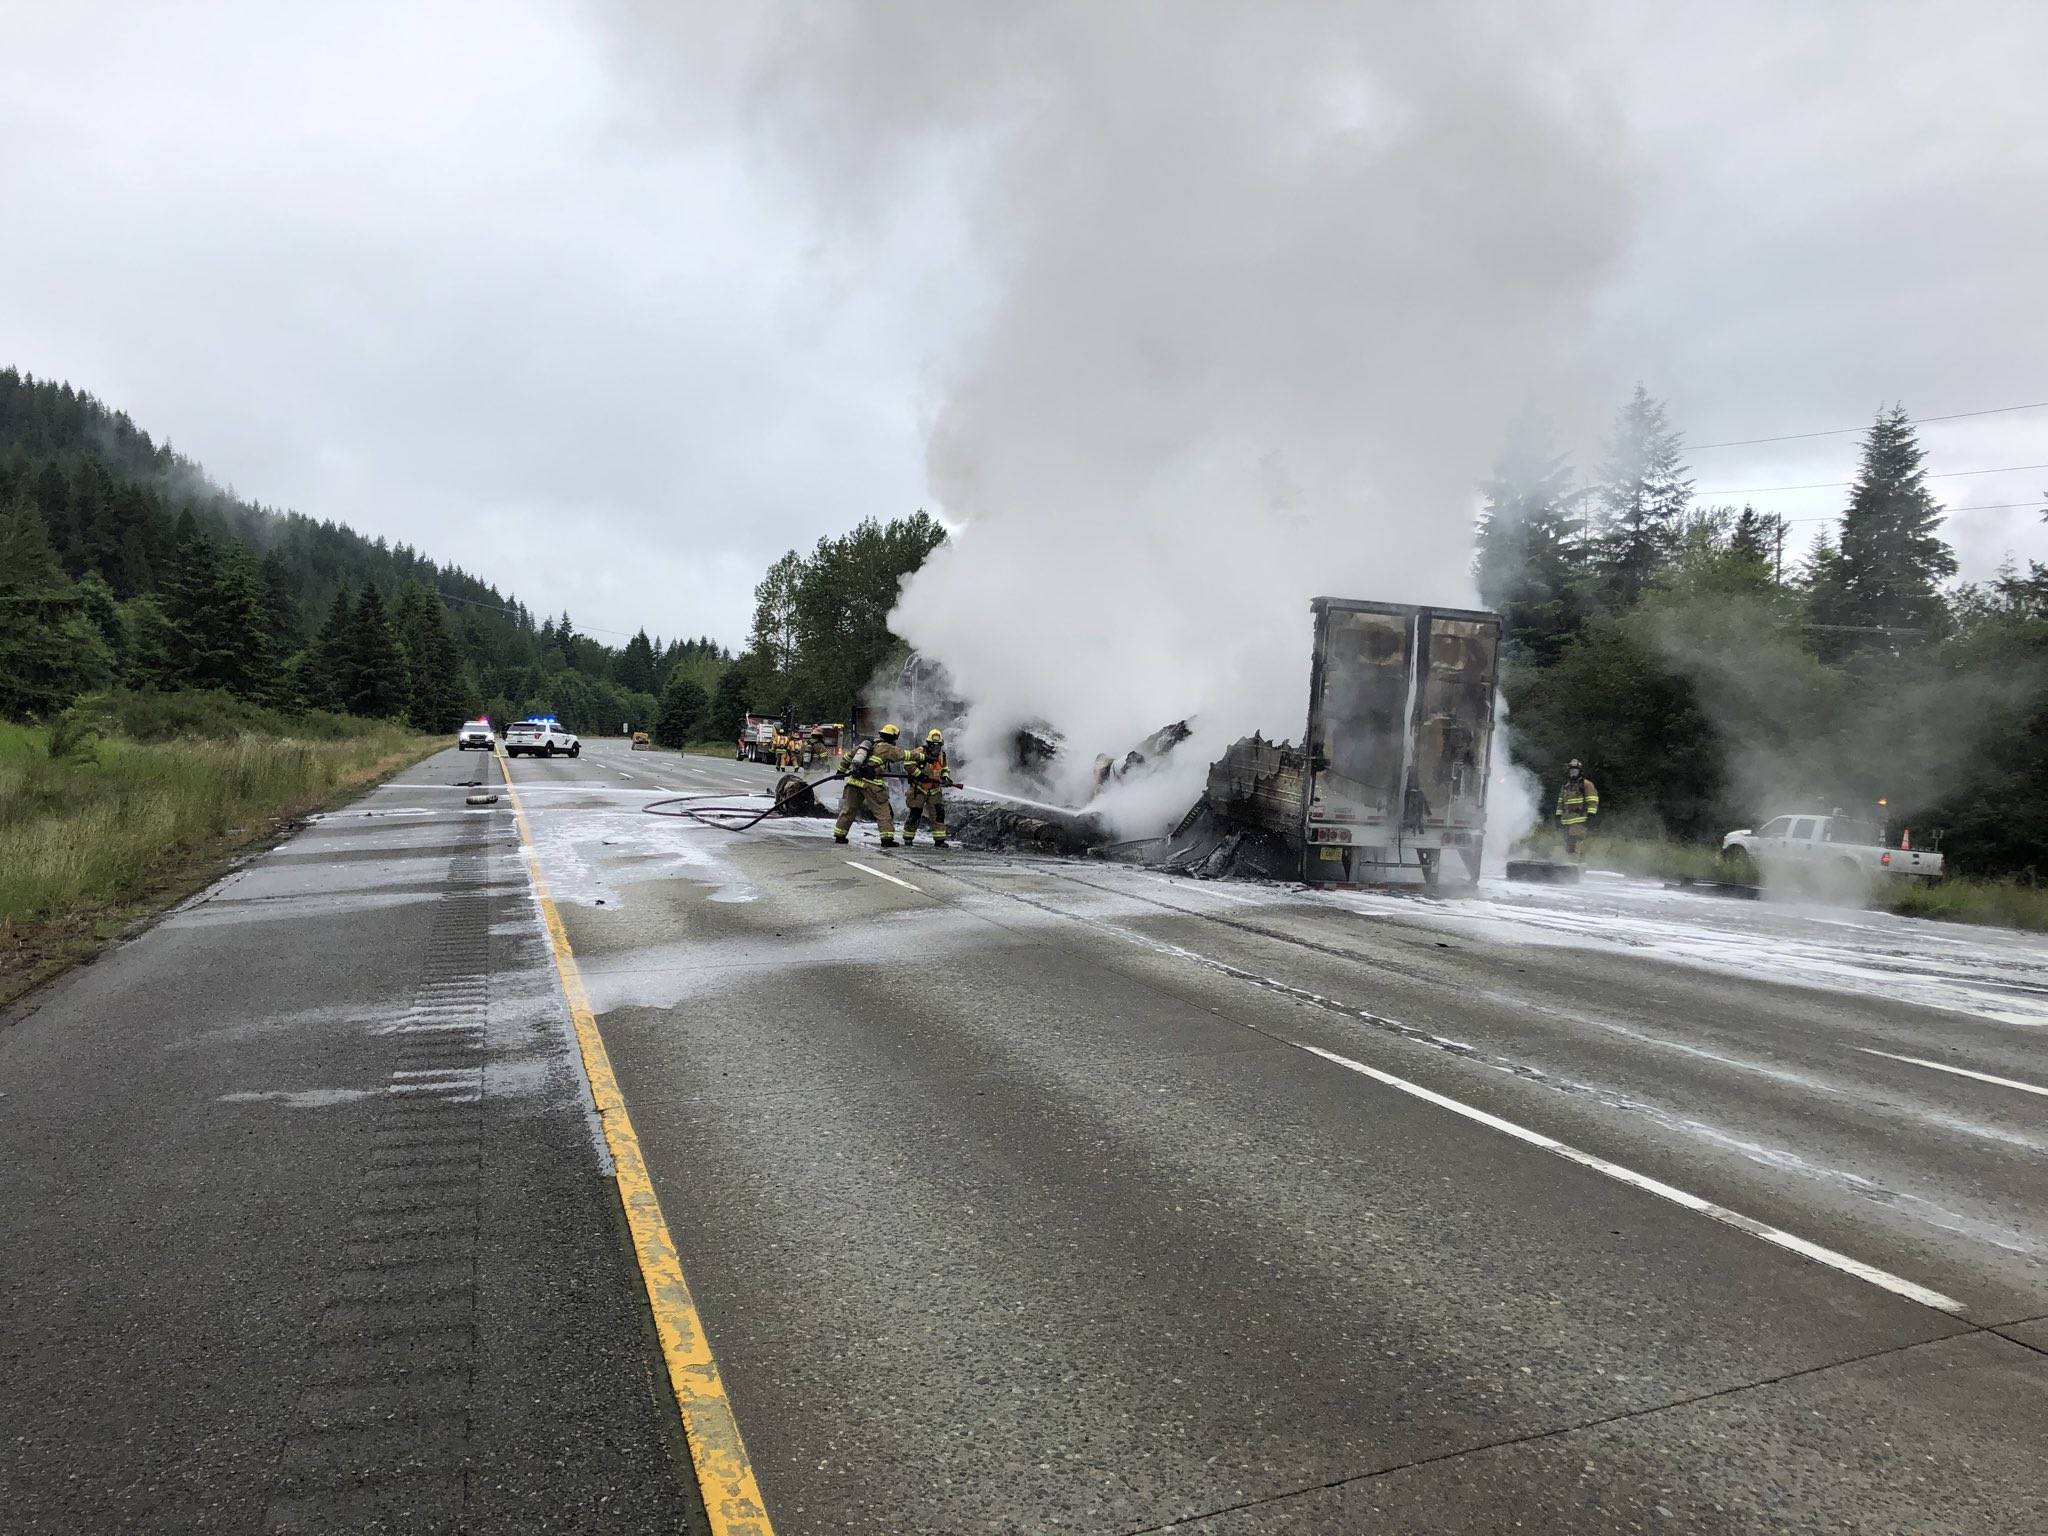 A semi truck collided with a dump truck on June 16 near milepost 27 on westbound I-90. It closed westbound lanes at milepost 31. Photo contributed by Trooper Rick Johnson